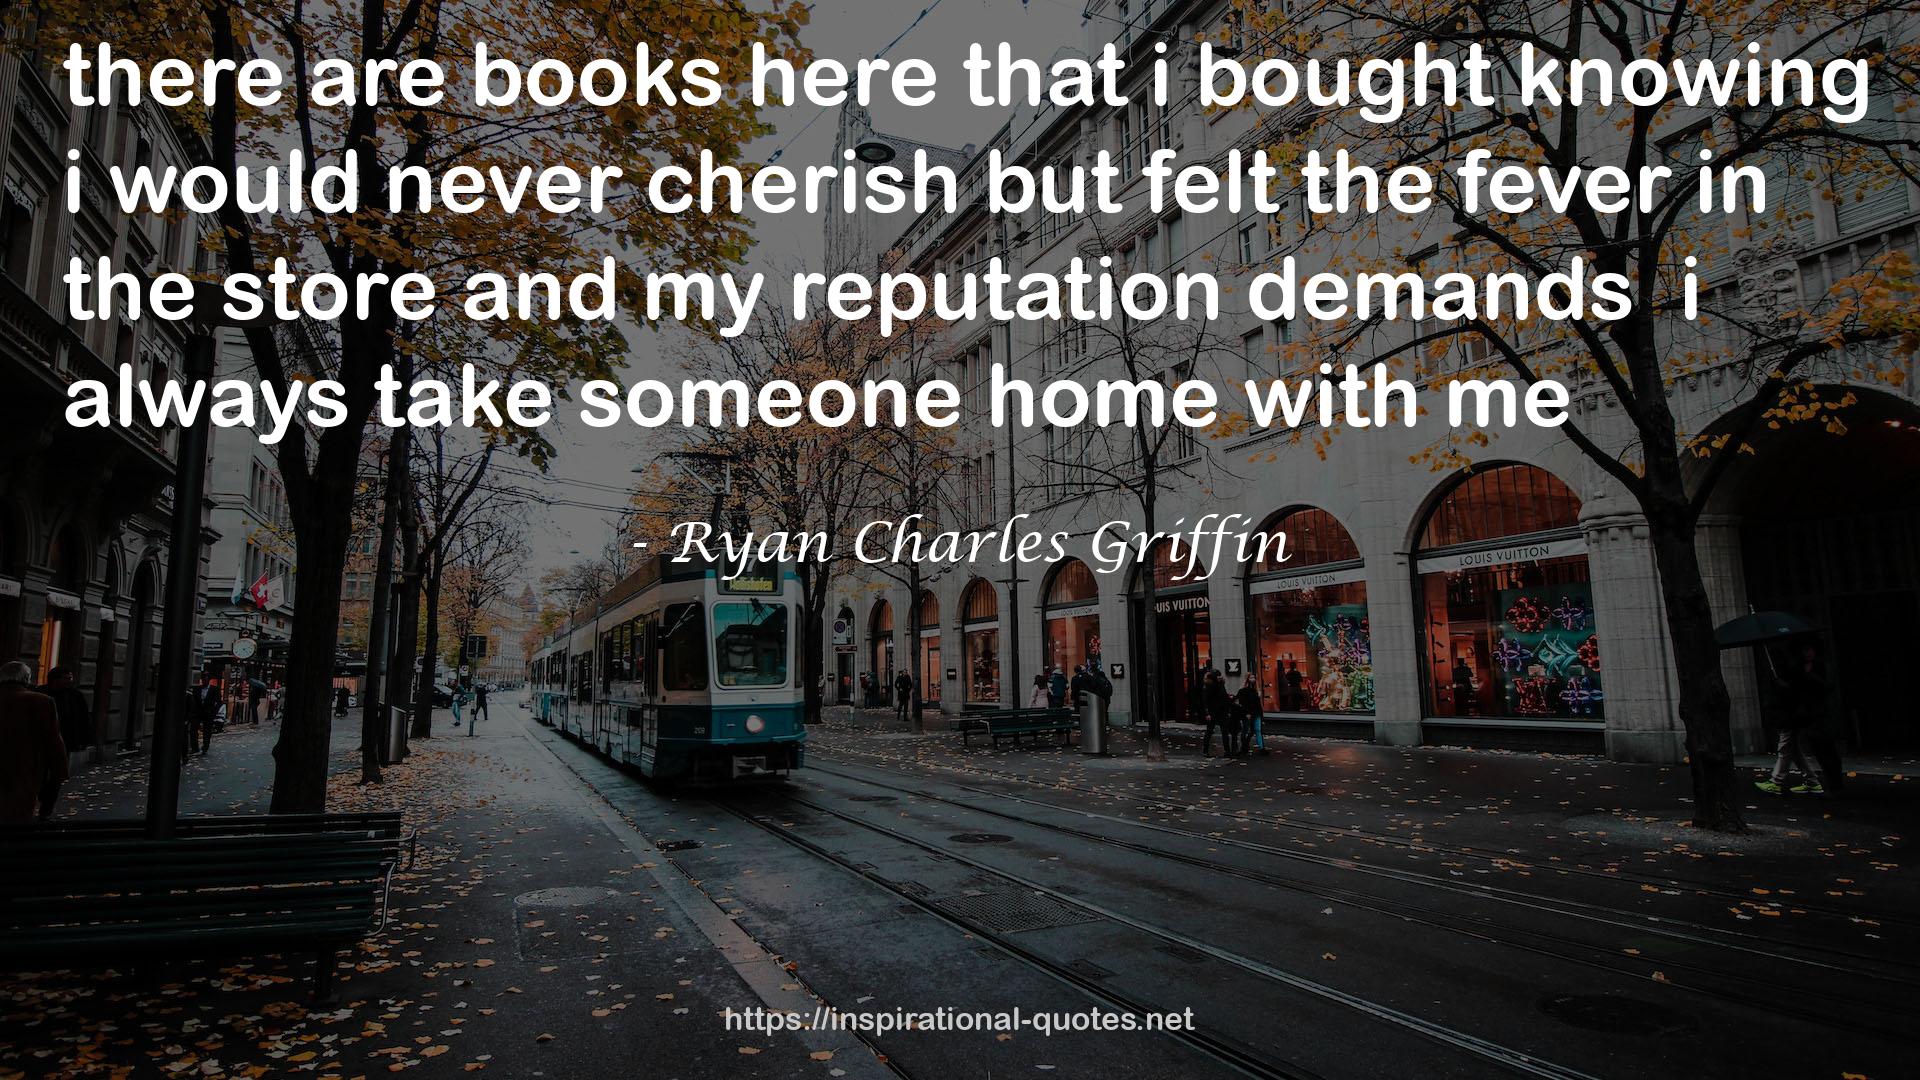 Ryan Charles Griffin QUOTES